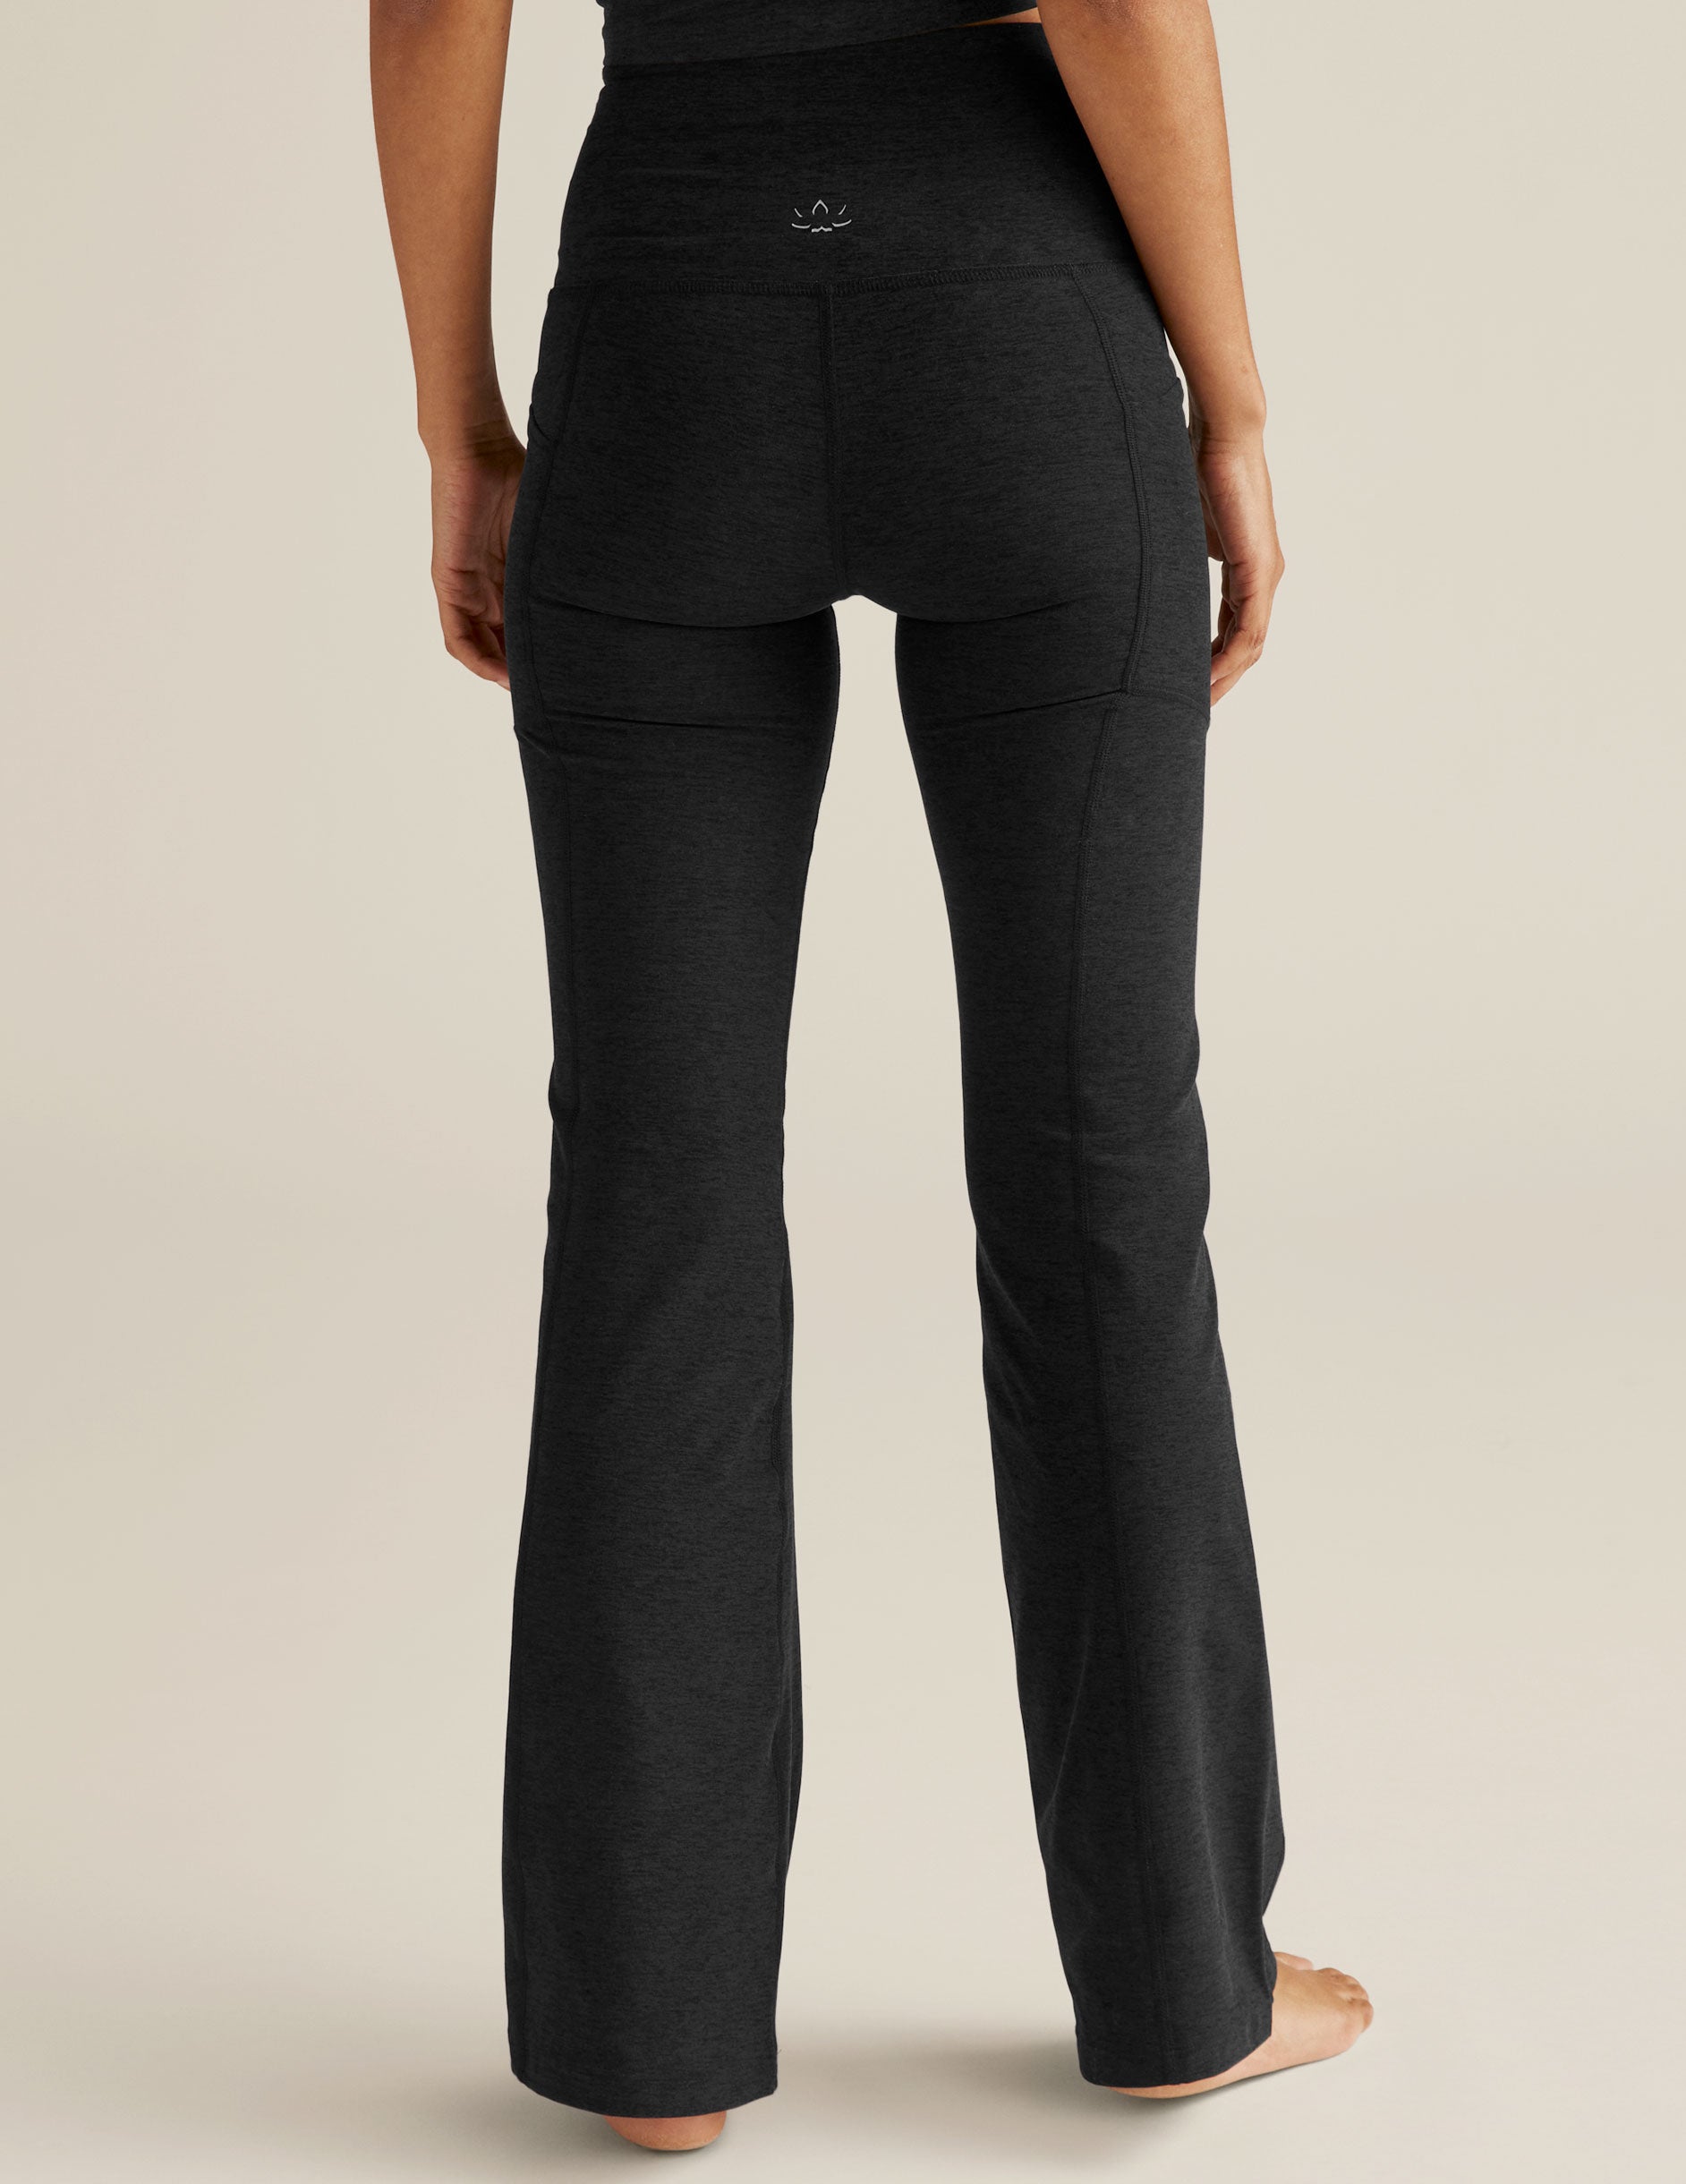 Buy Bootcut Yoga Pants with 3 Pockets for Women High Waist Flare